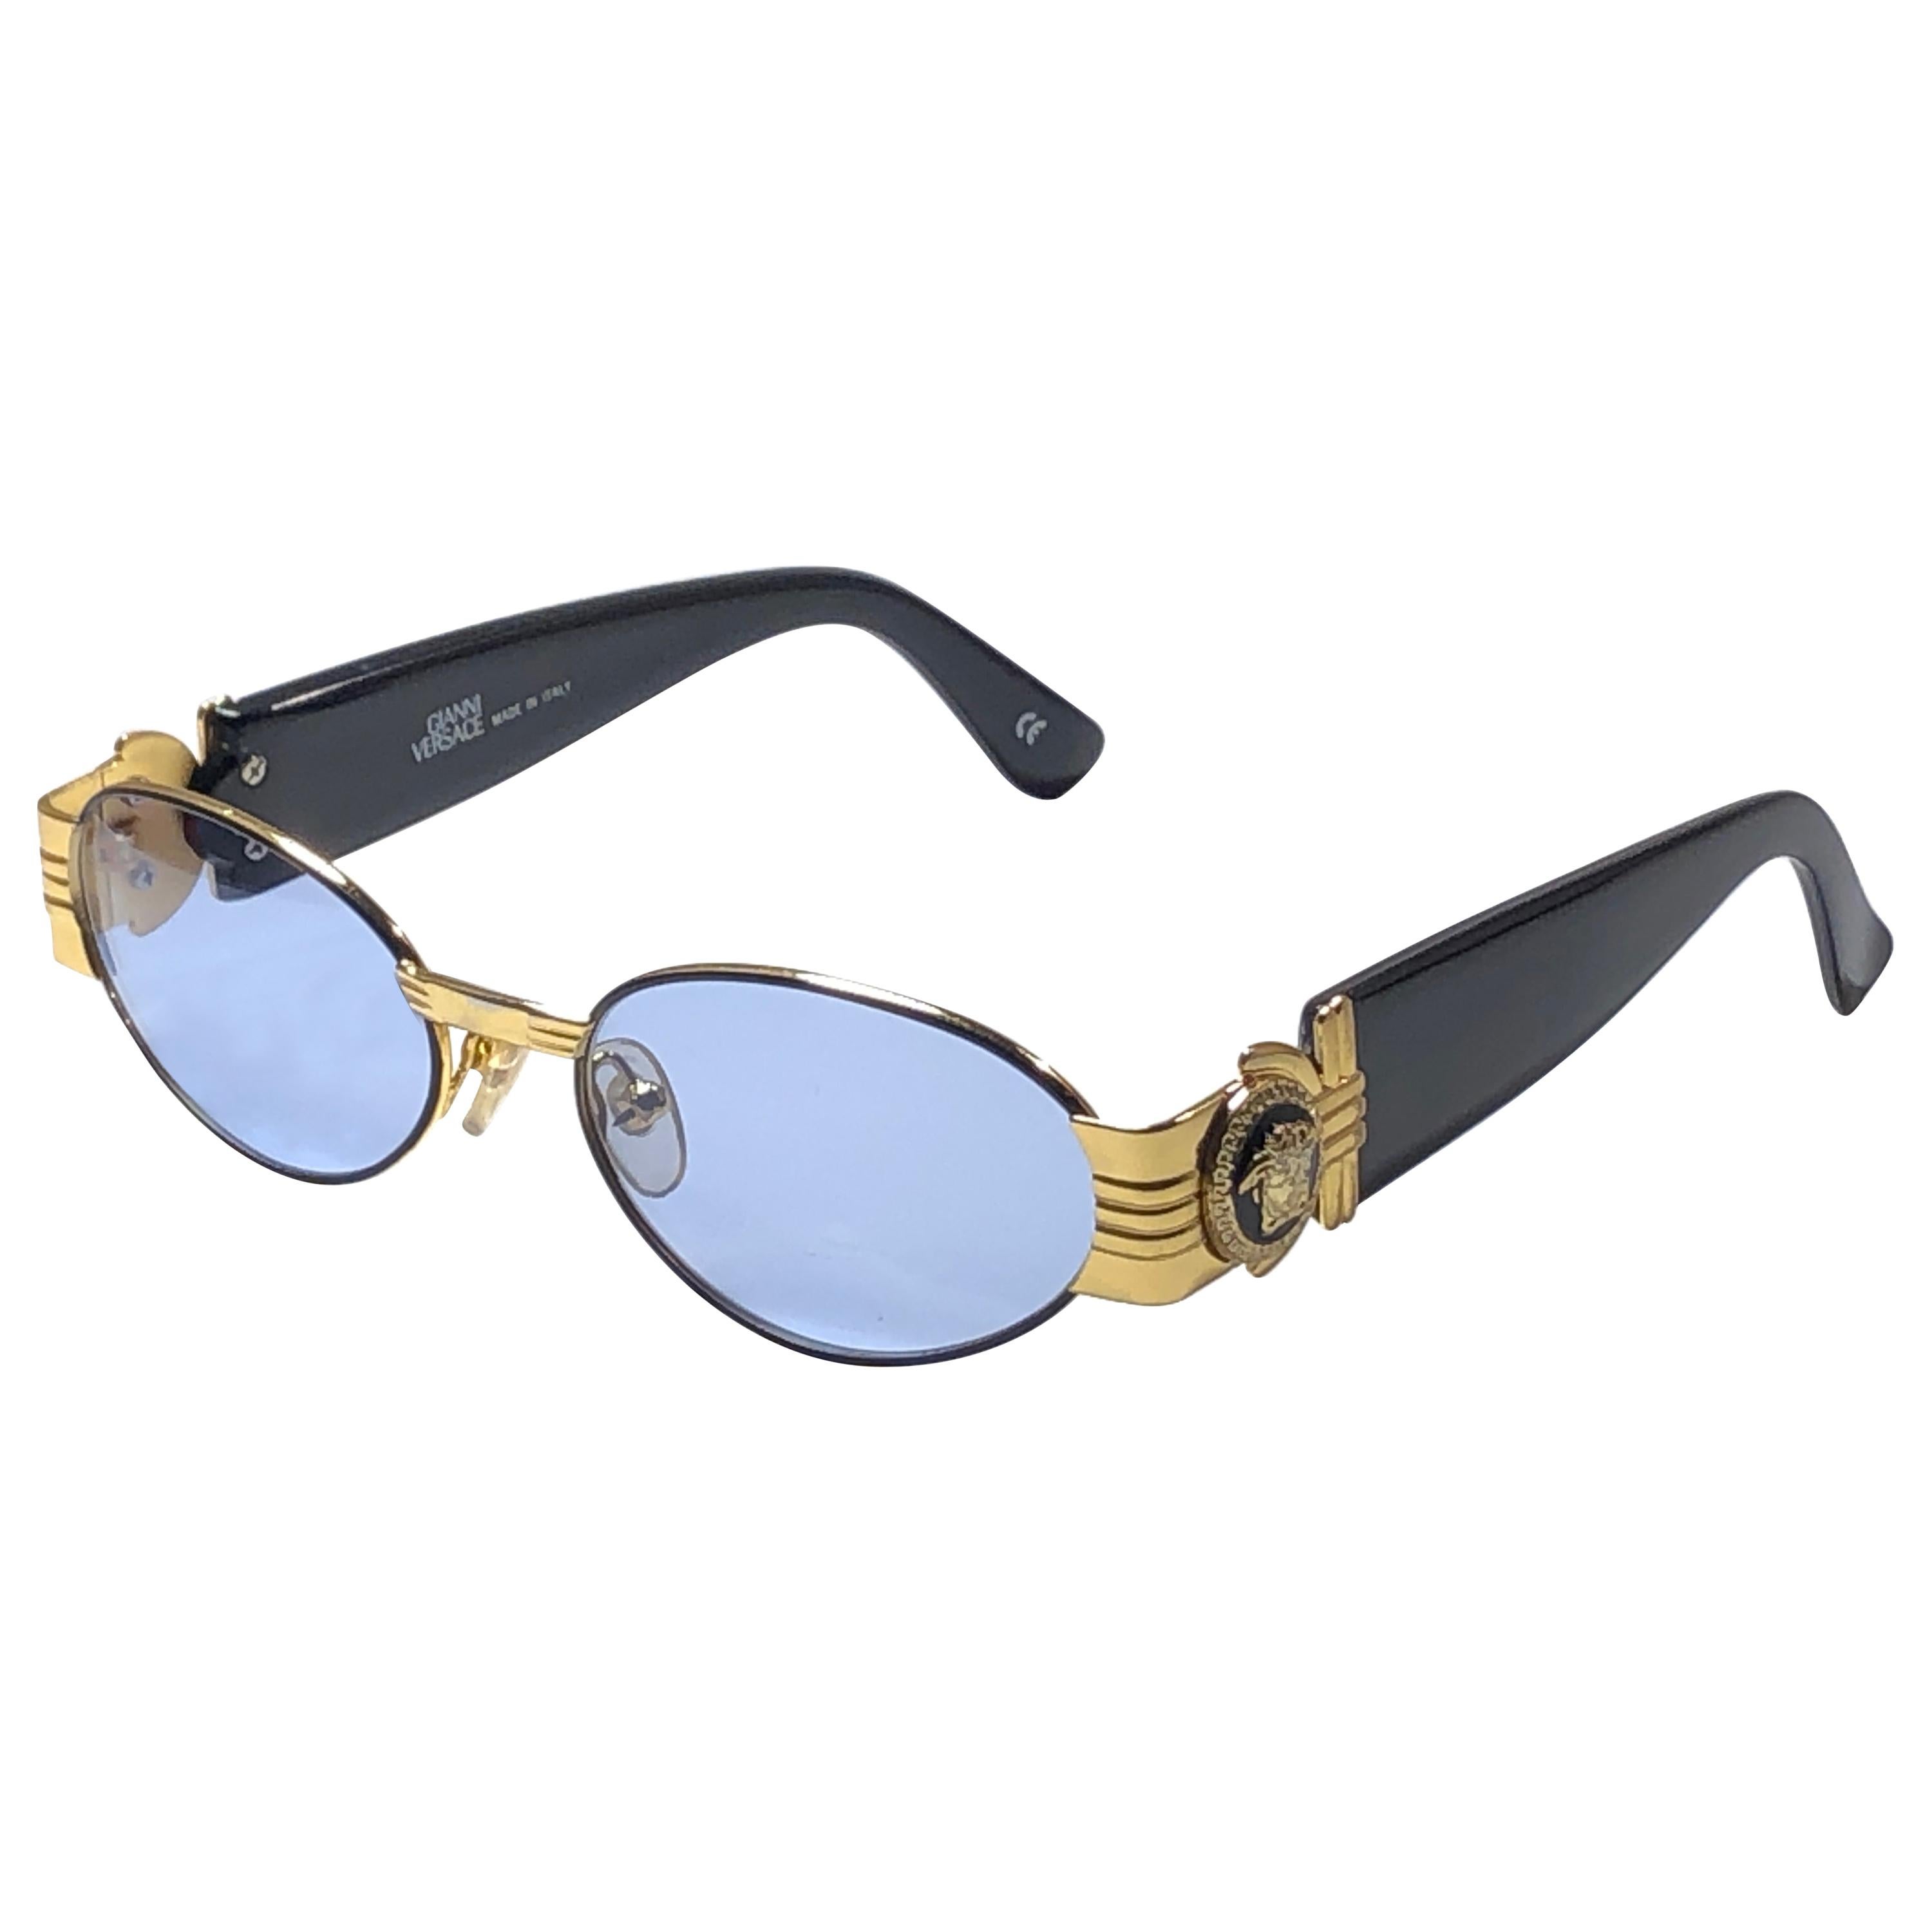 Vintage Gianni Versace small black & gold frame with baby blue lenses.

This pair show minor discoloration on the nose bridge . Please study the pictures prior purchase.

Made in italy.

Front : 13.5 cms

Lens Width : 5 cms

Lens Height : 3.5